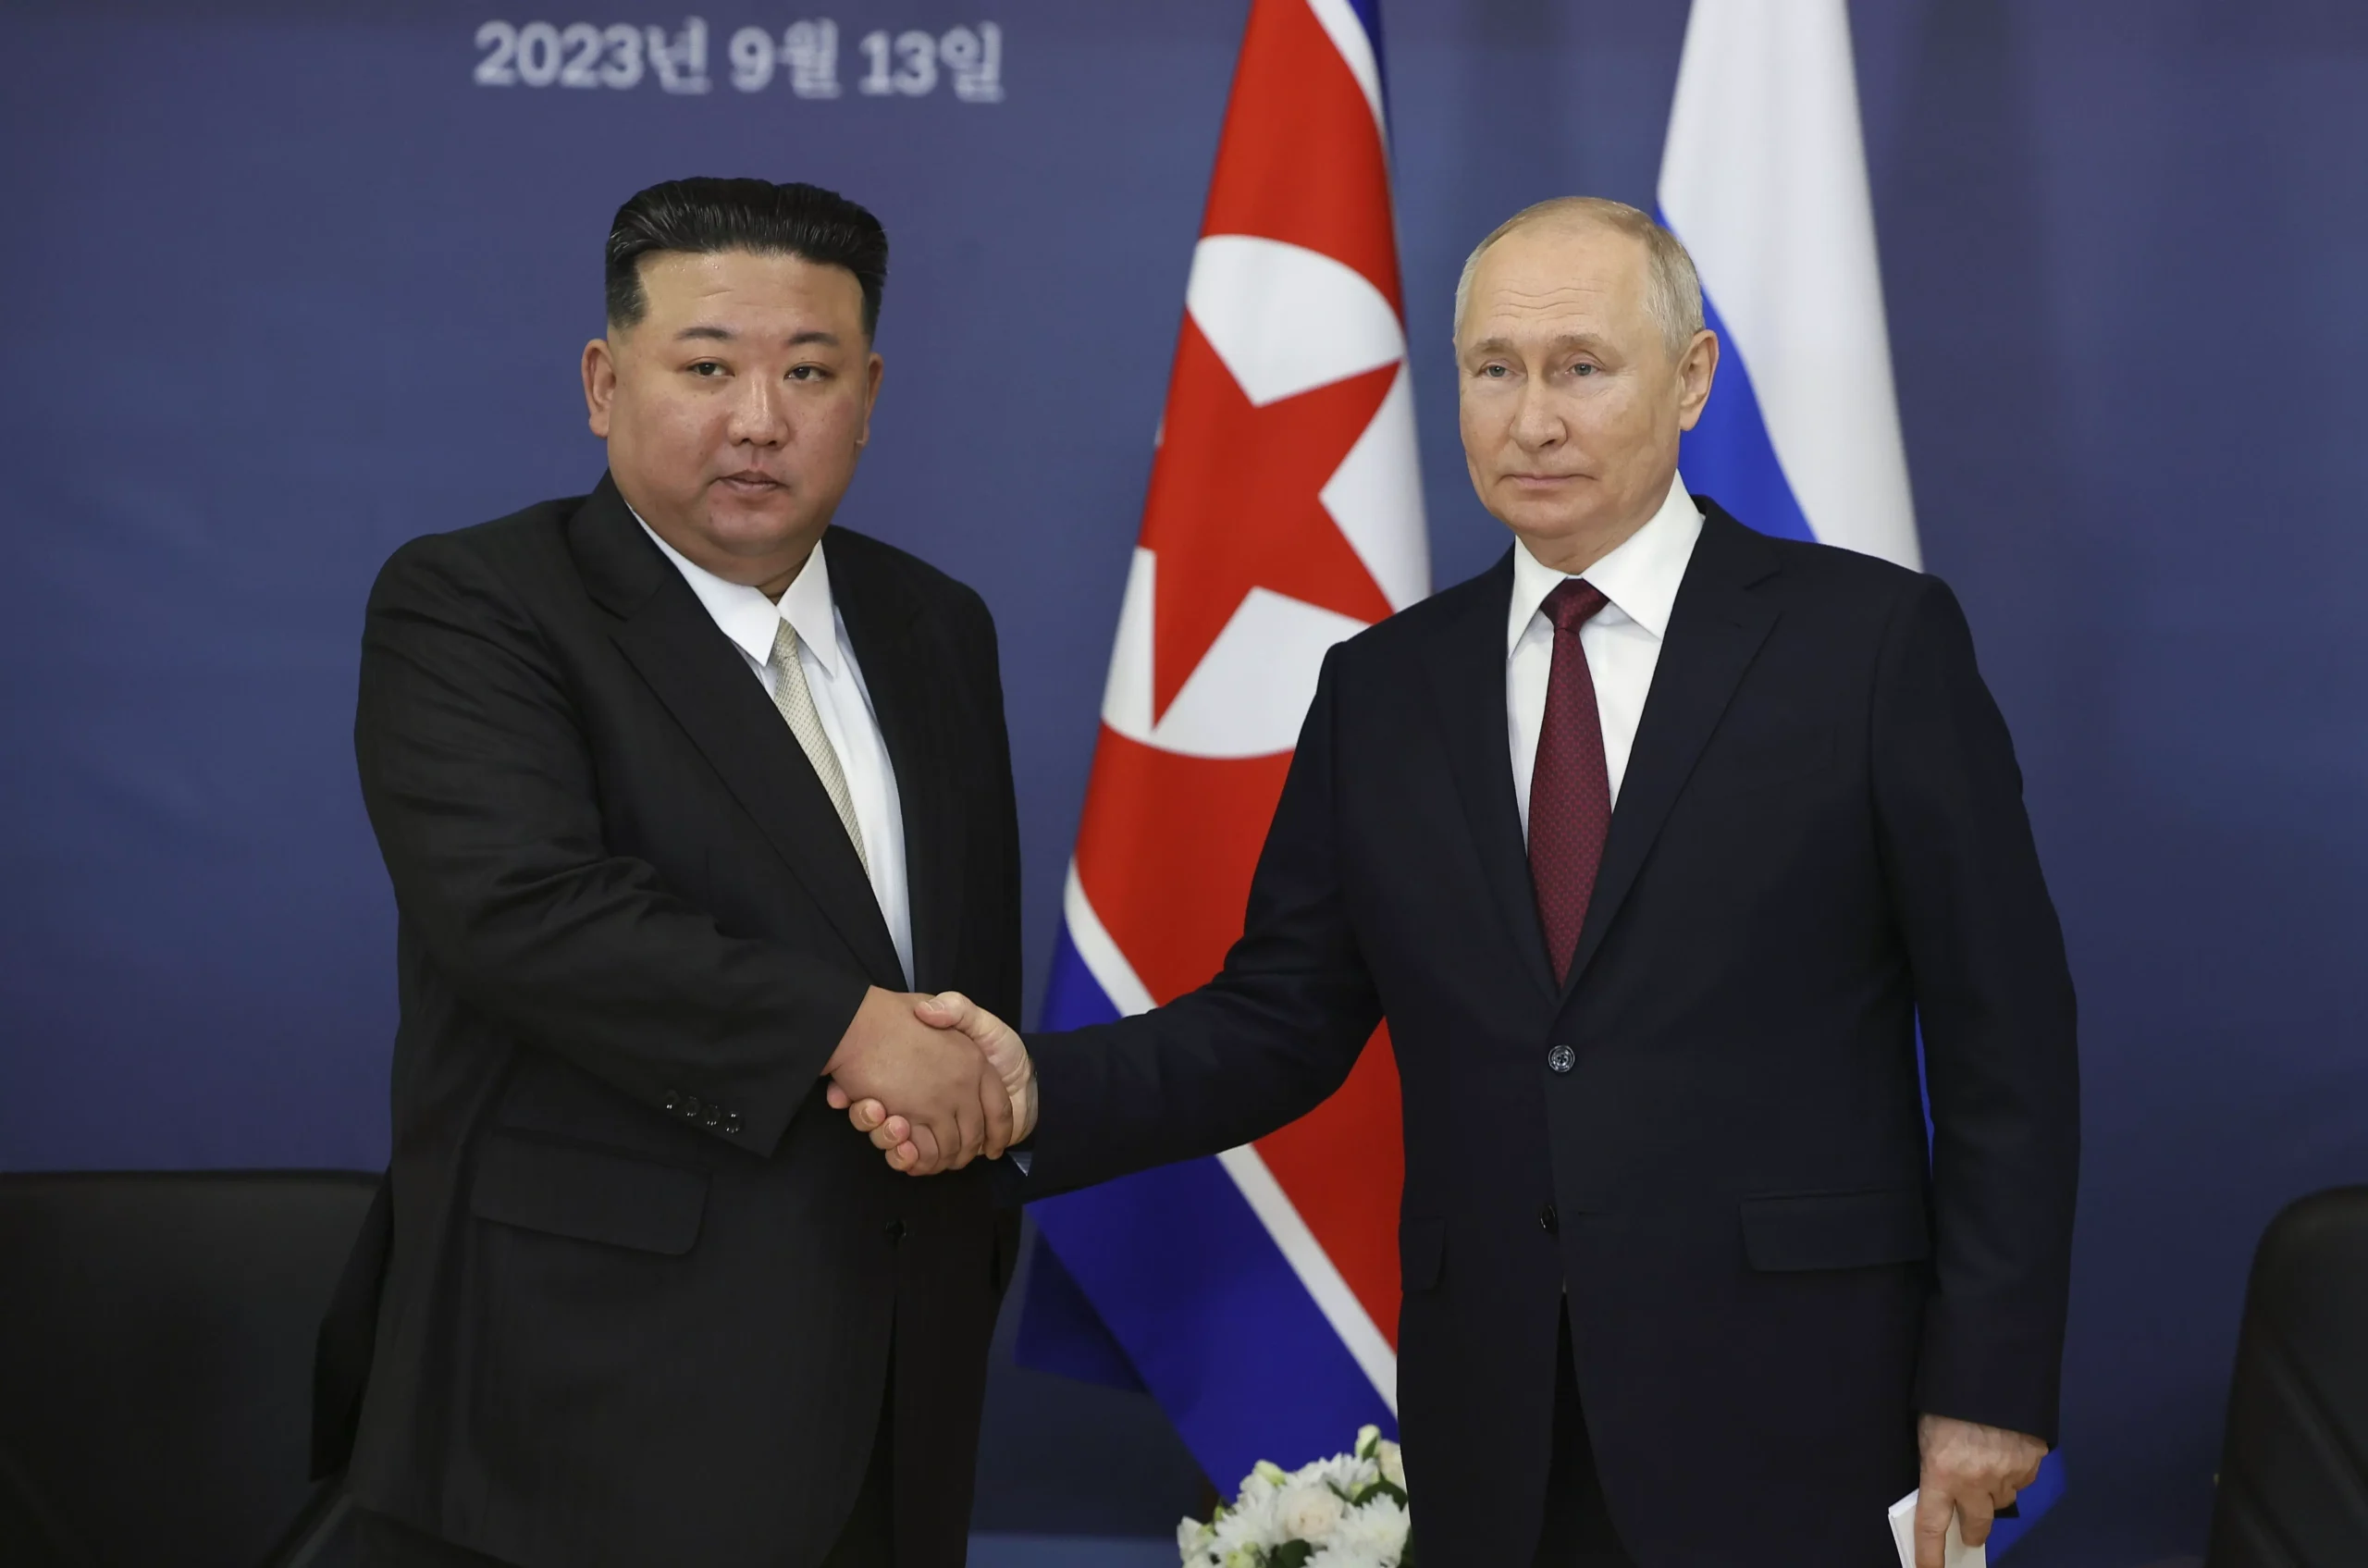 Russia and China accuse US stoking Mideast Tensions